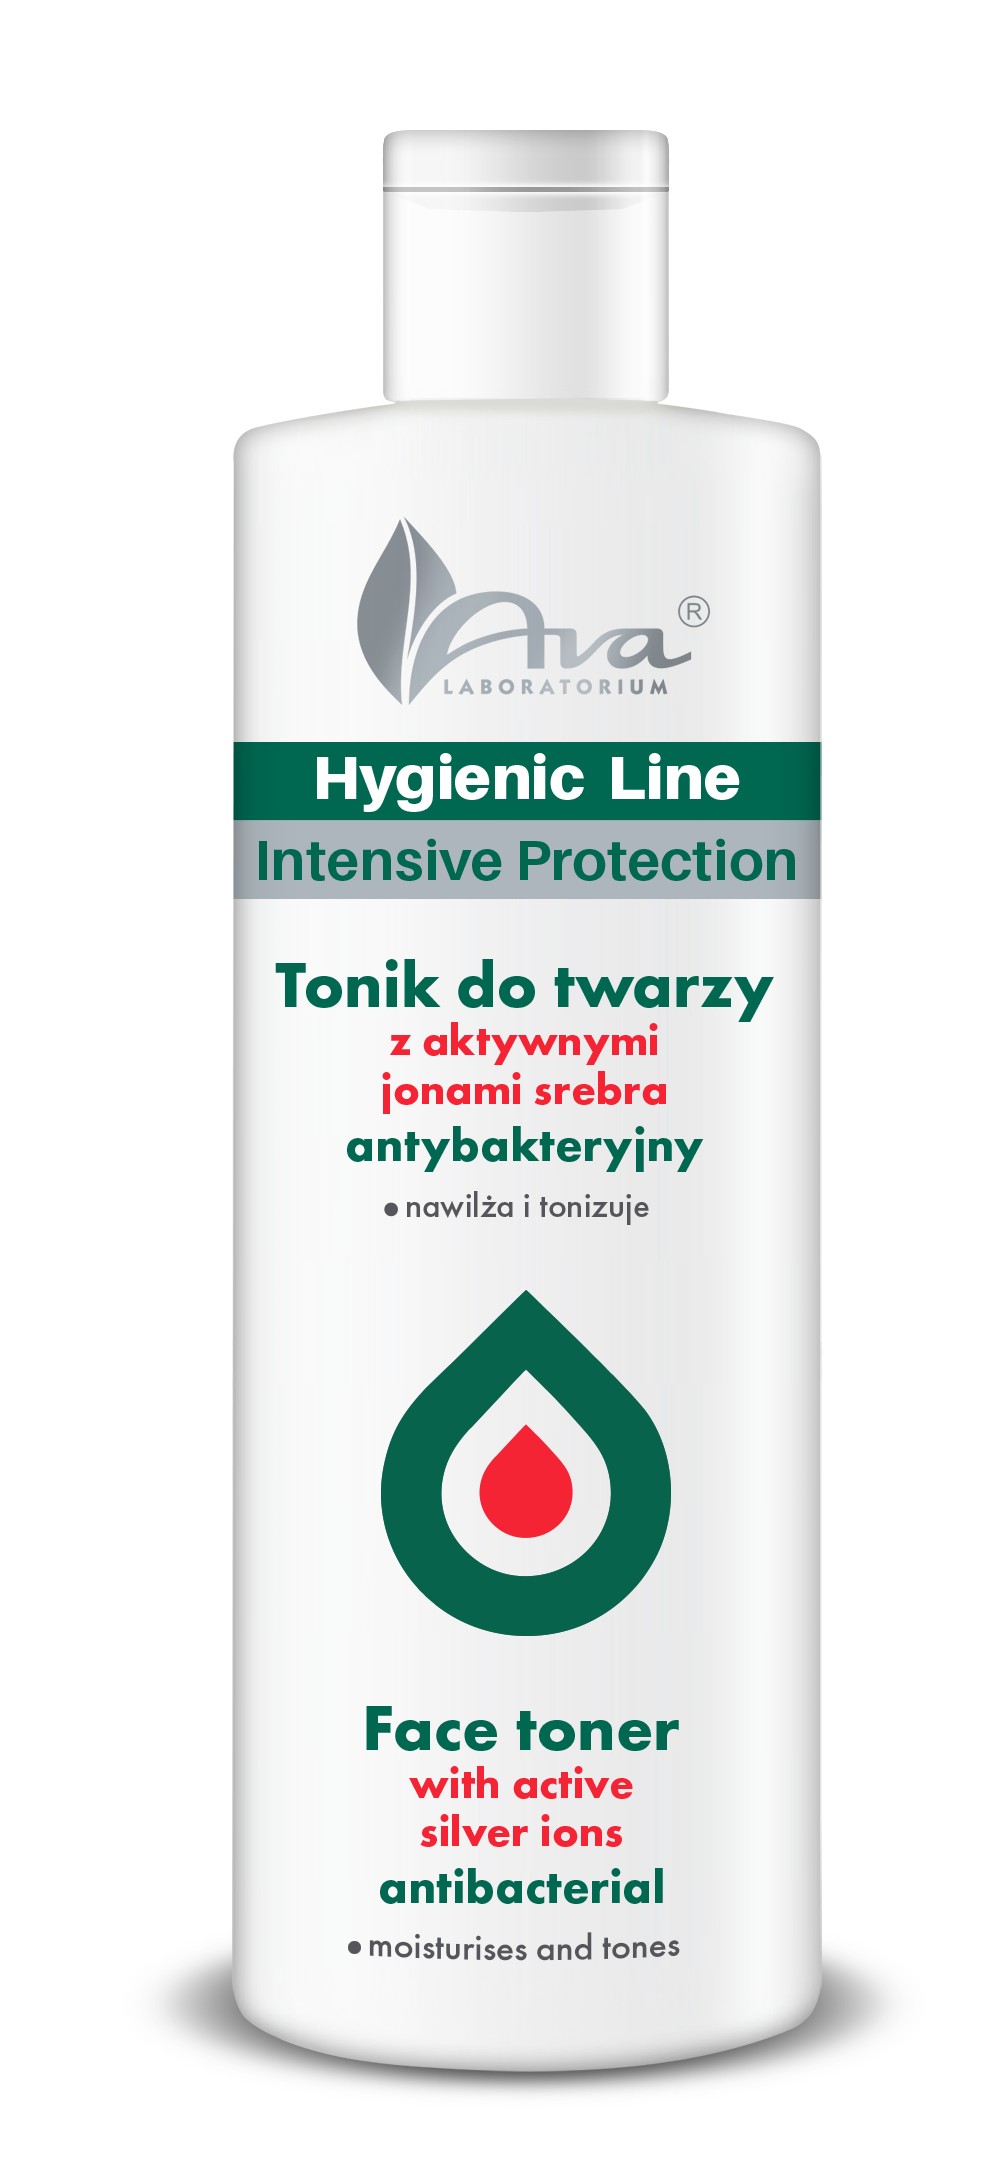 Hygenic Line – Antibacterial face toner with active silver ions